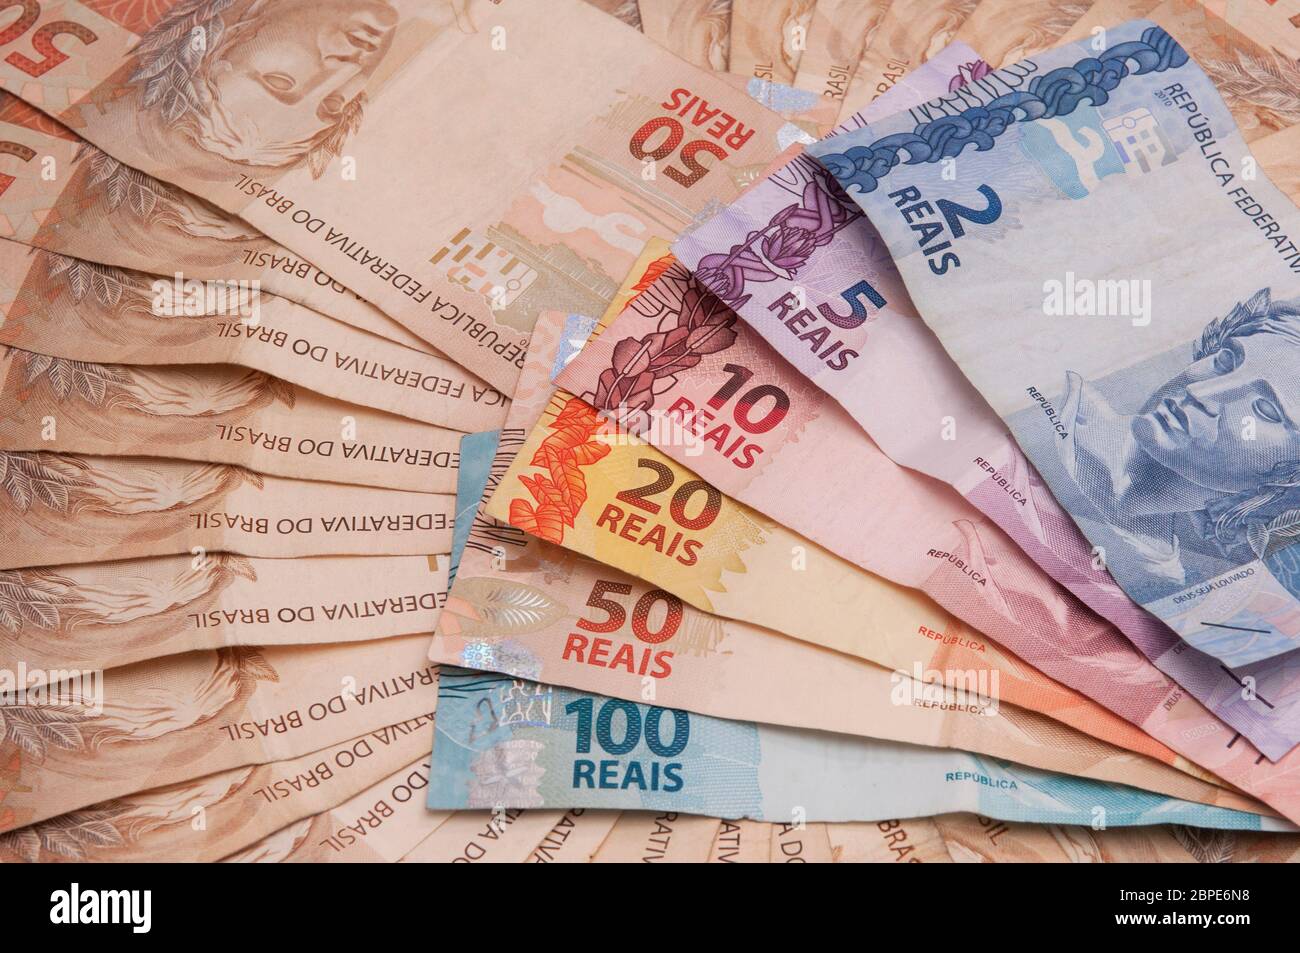 A few bills of brazilian currency (real) Stock Photo